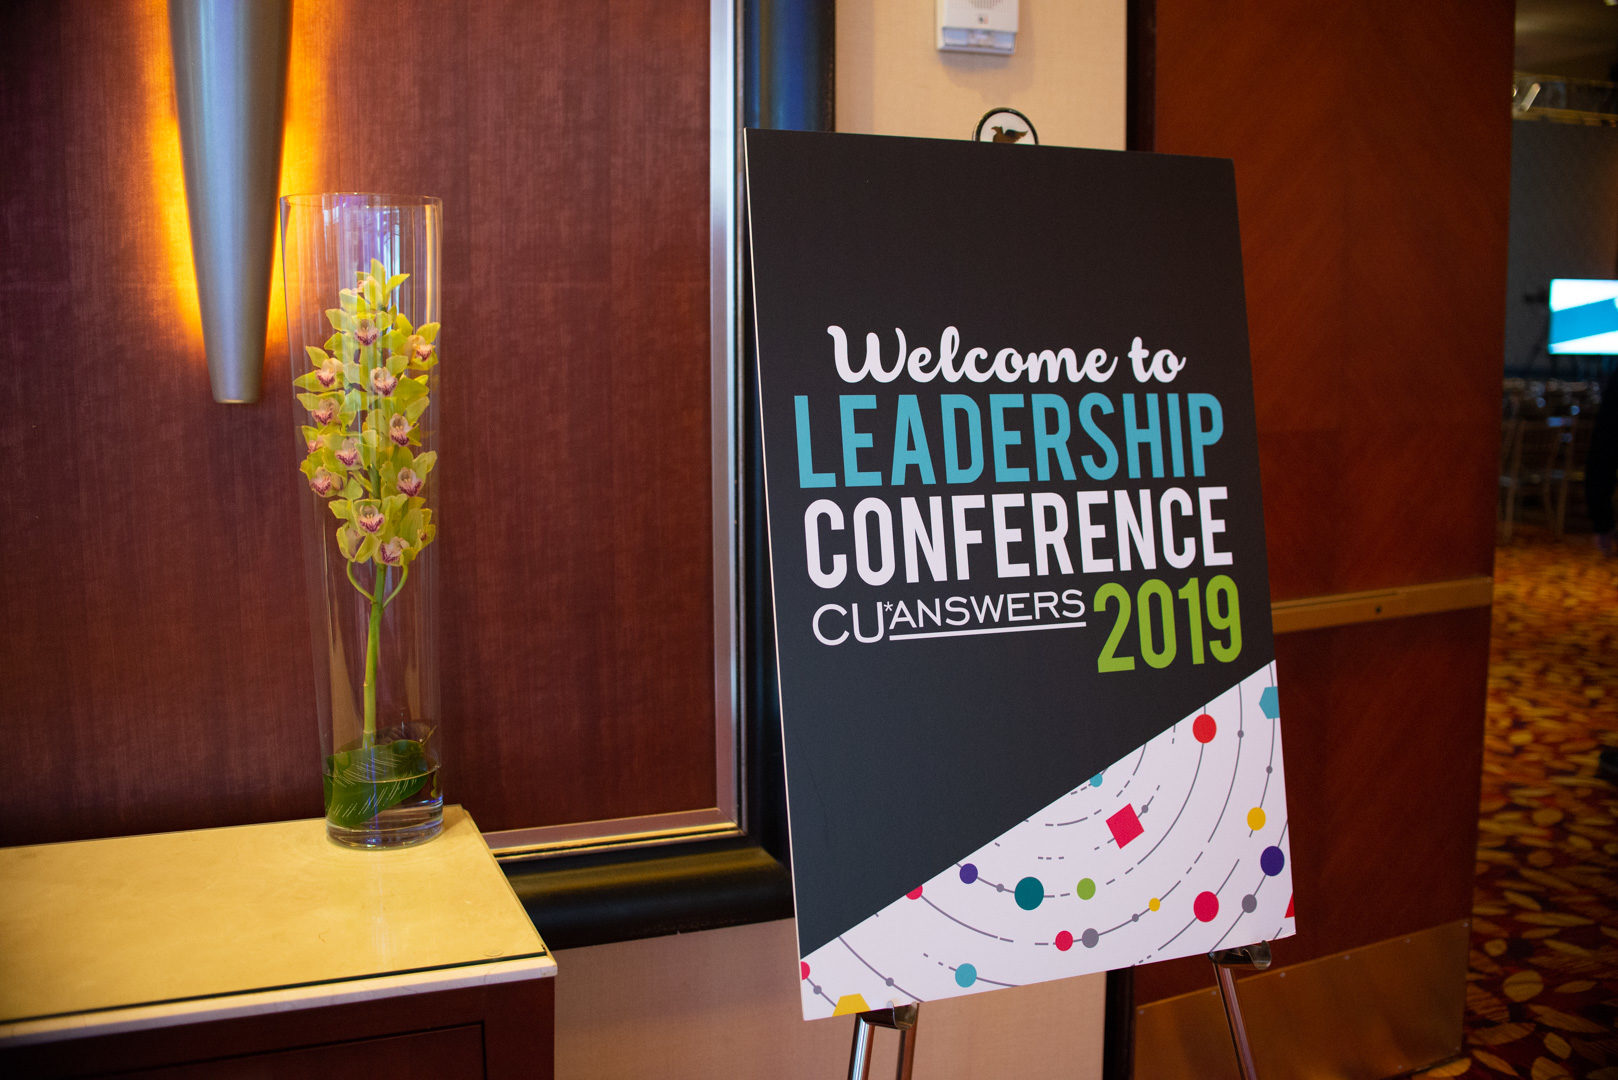 CU*Answers held its 2019 Leadership Conference at the J.W. Marriott Hotel in downtown Grand Rapids.